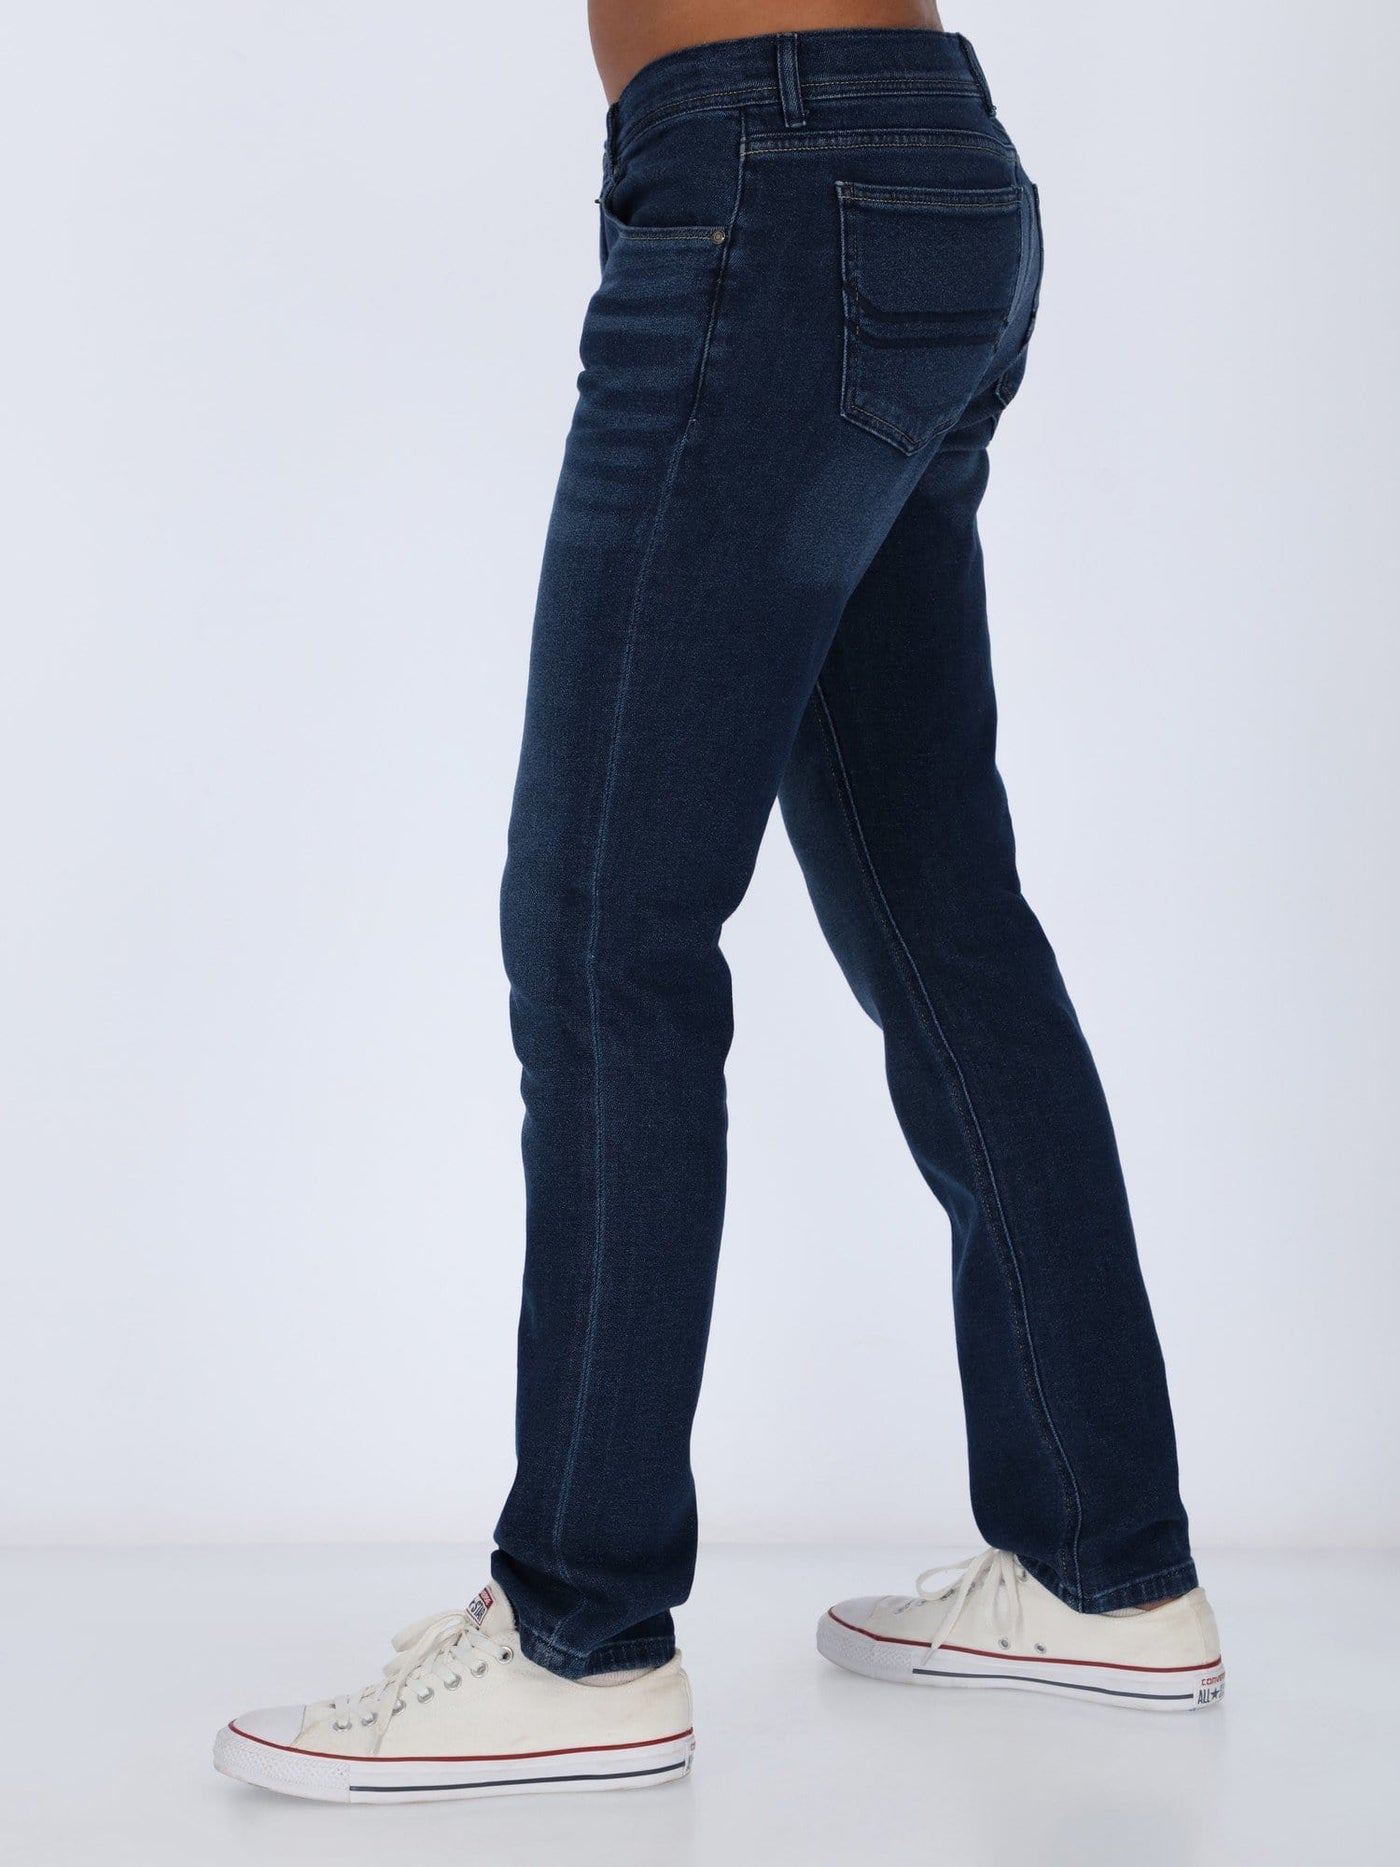 Daniel Hechter Pants & Shorts Jeans Pants with Wash Out Effect